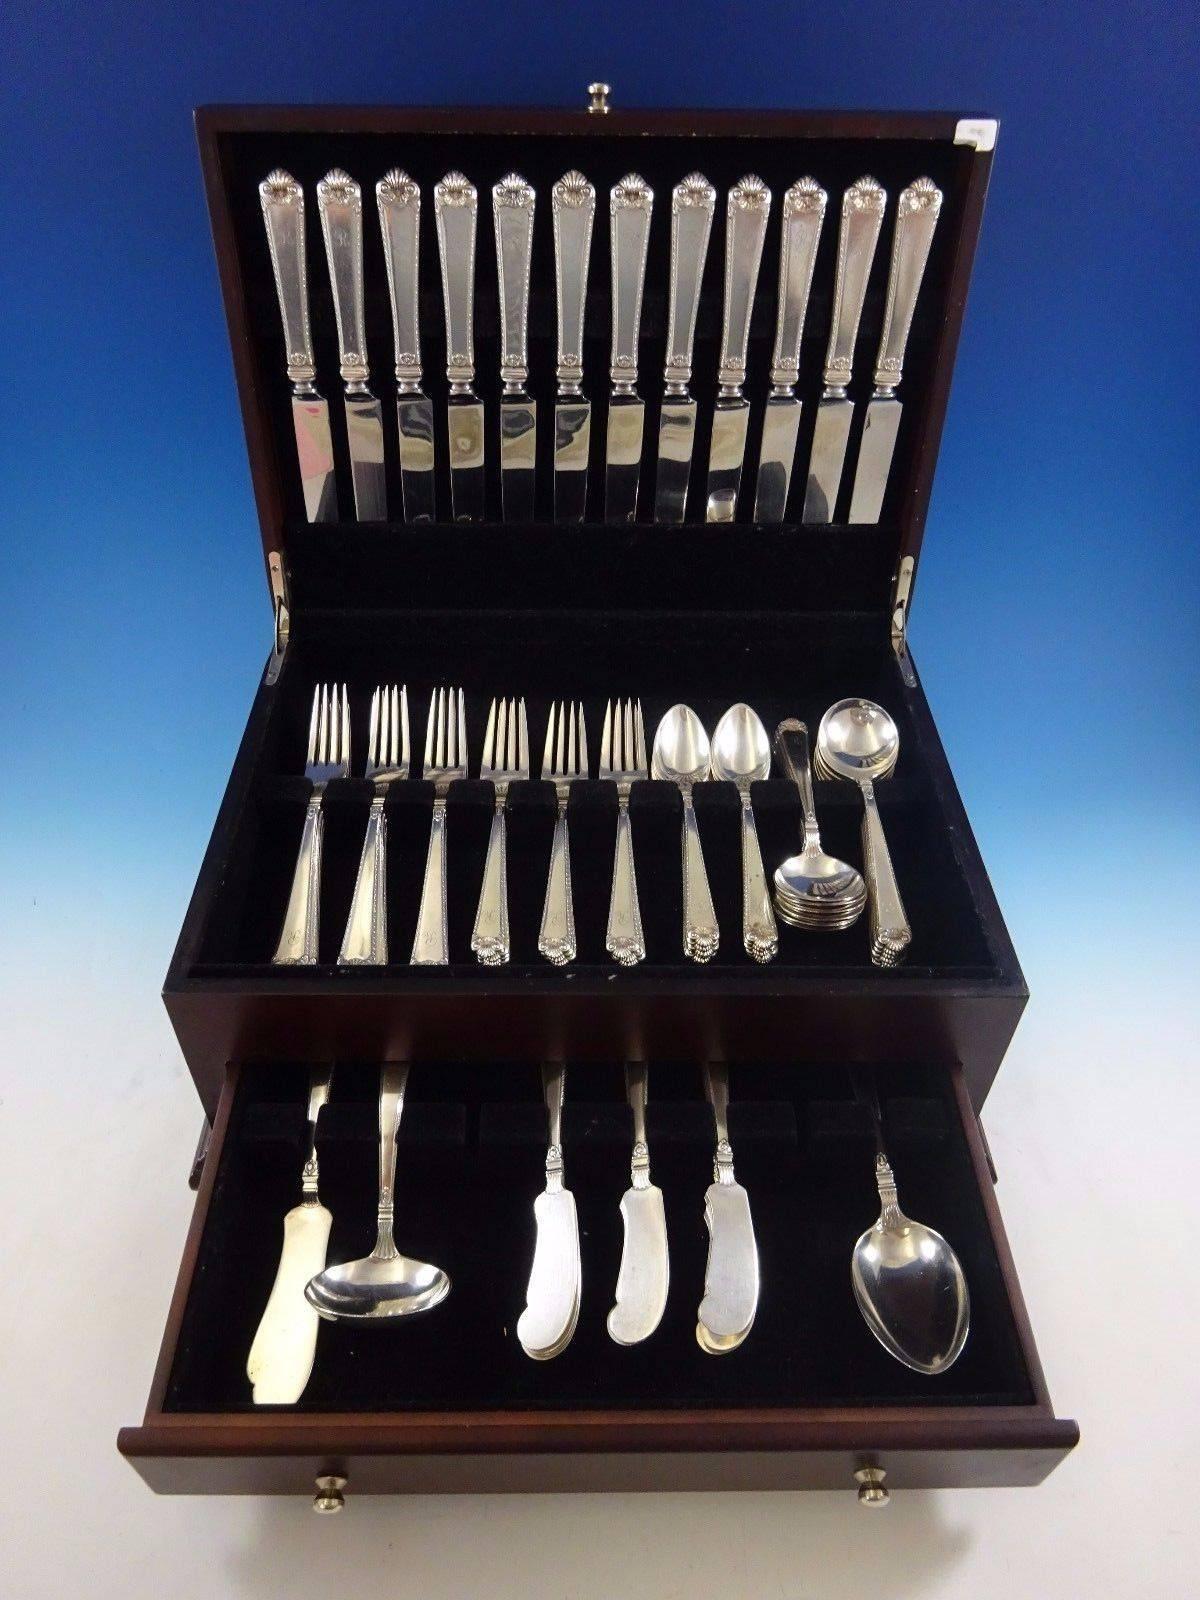 George II Rex by Watson sterling silver flatware set - 75 pieces. This set includes: 

12 knives, 9 3/8